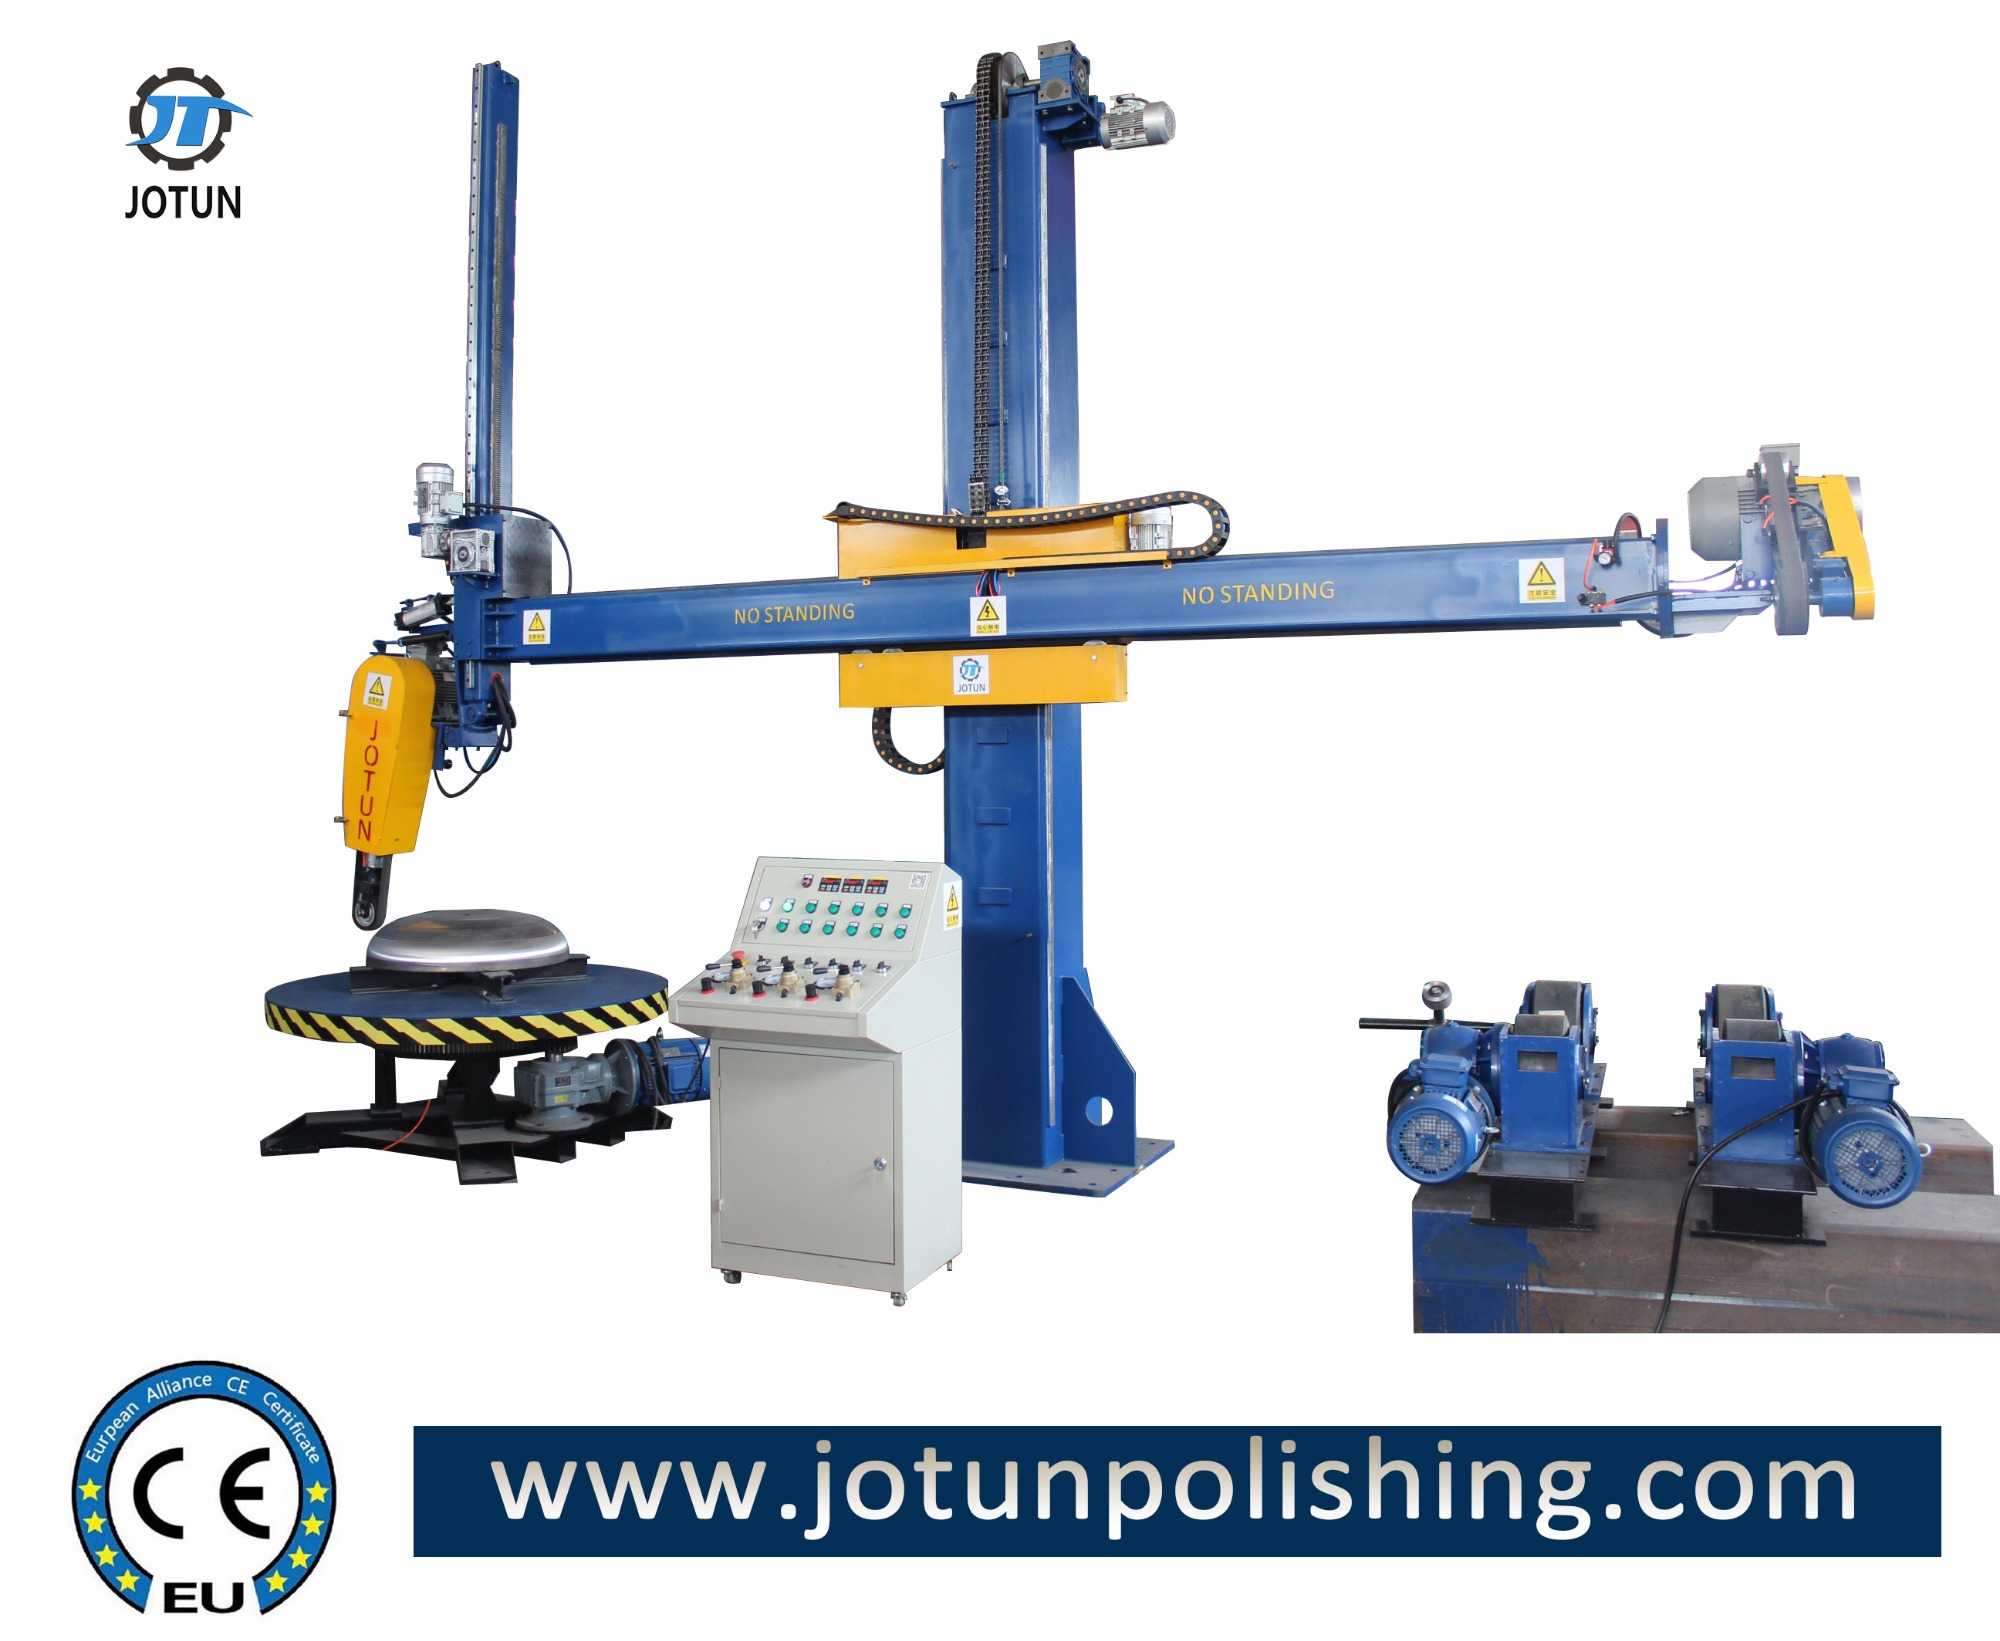 What is the belt grinding machine used for?